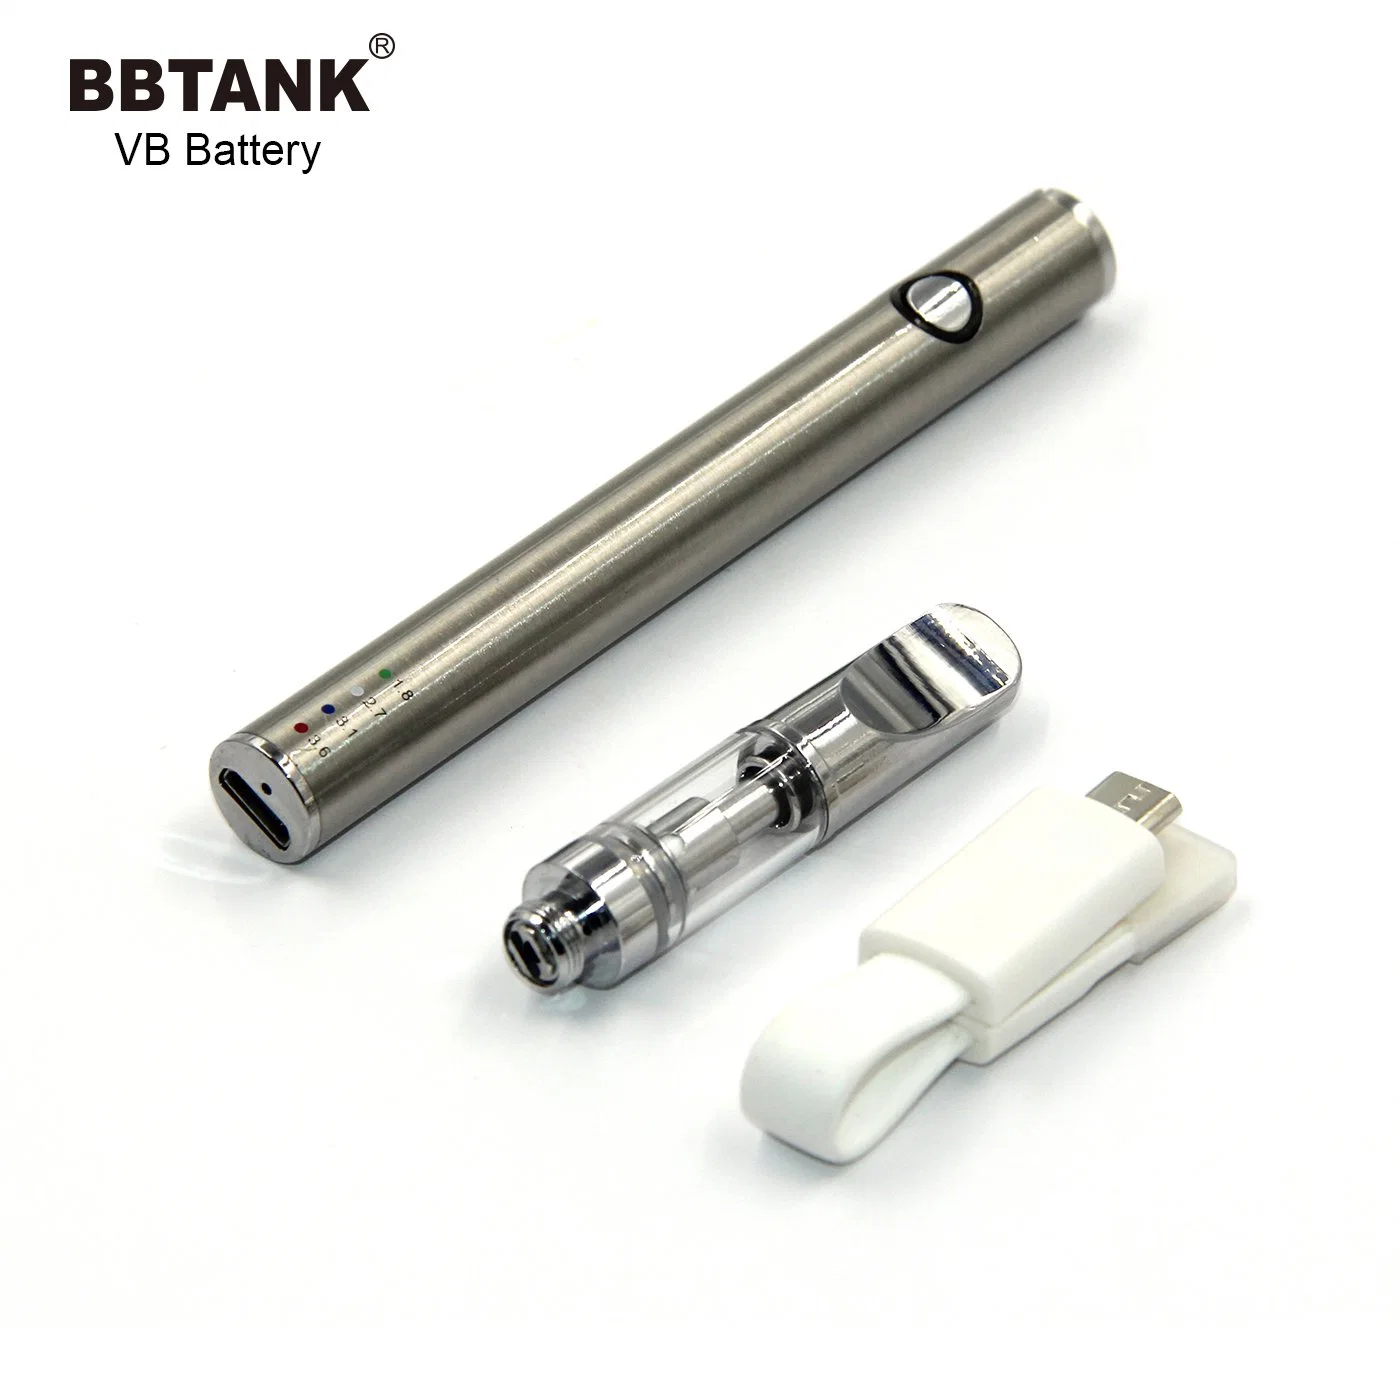 Bbtank Vb Battery 510 Thread with Preheat Function with Different Voltage Setting